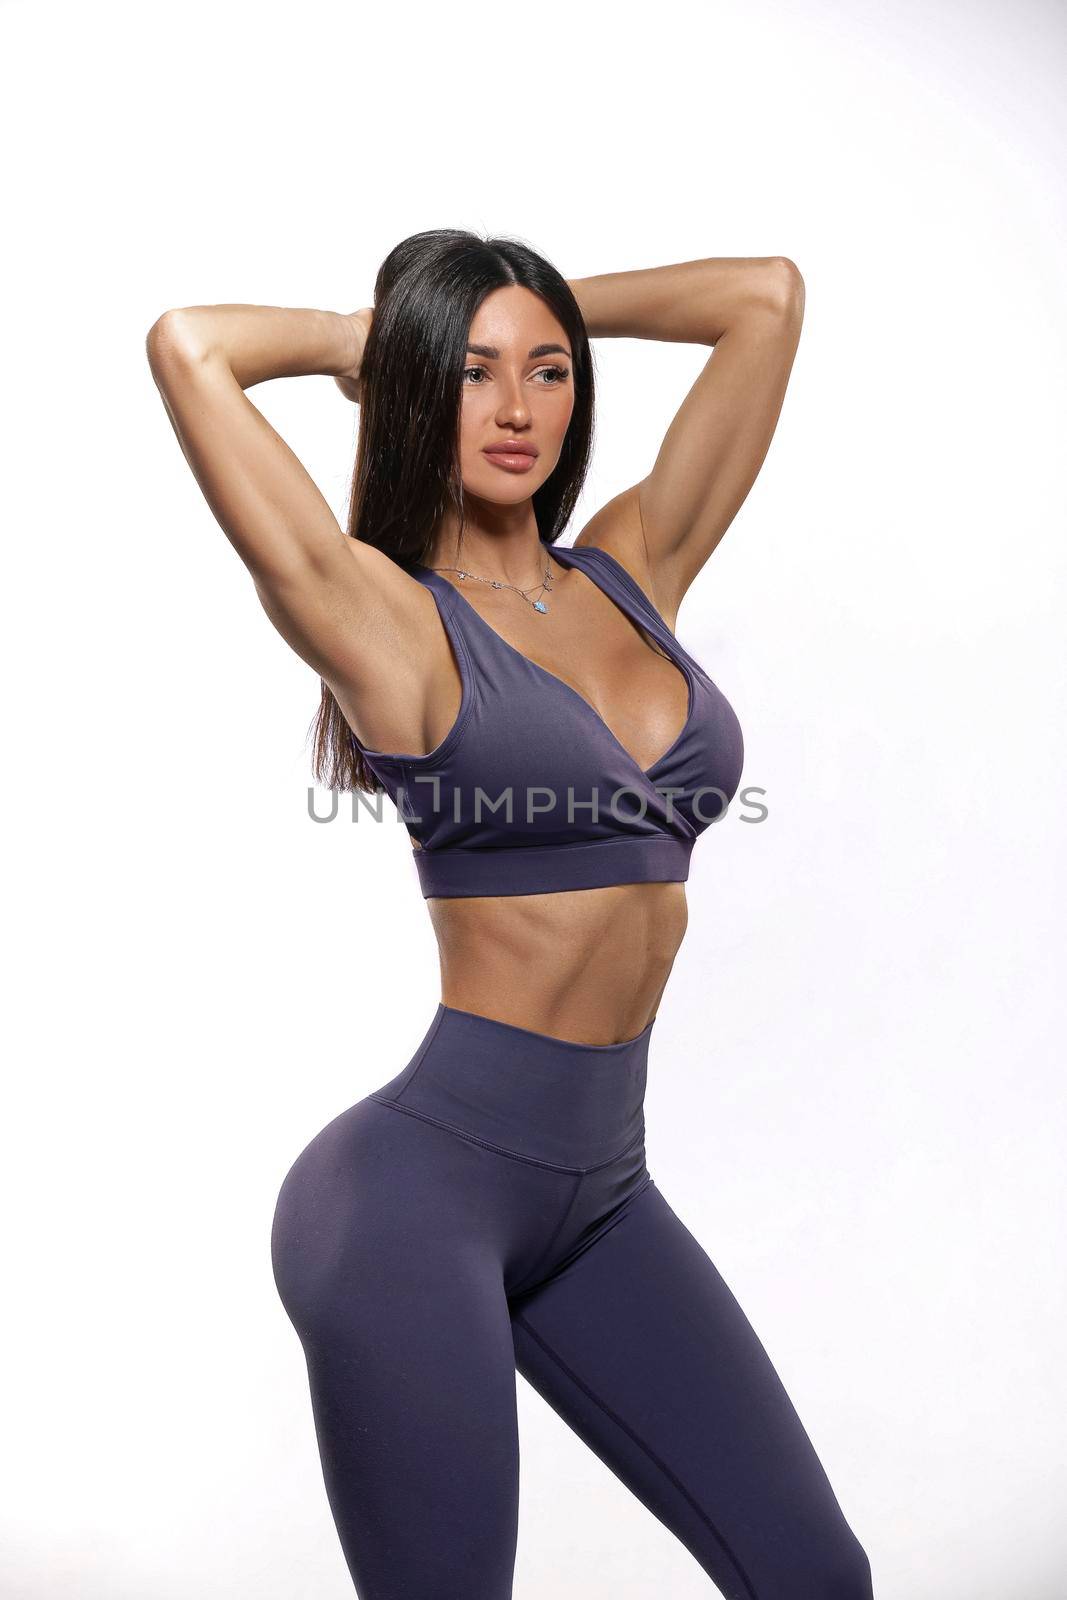 brunette girl in purple leggings and top on a white background